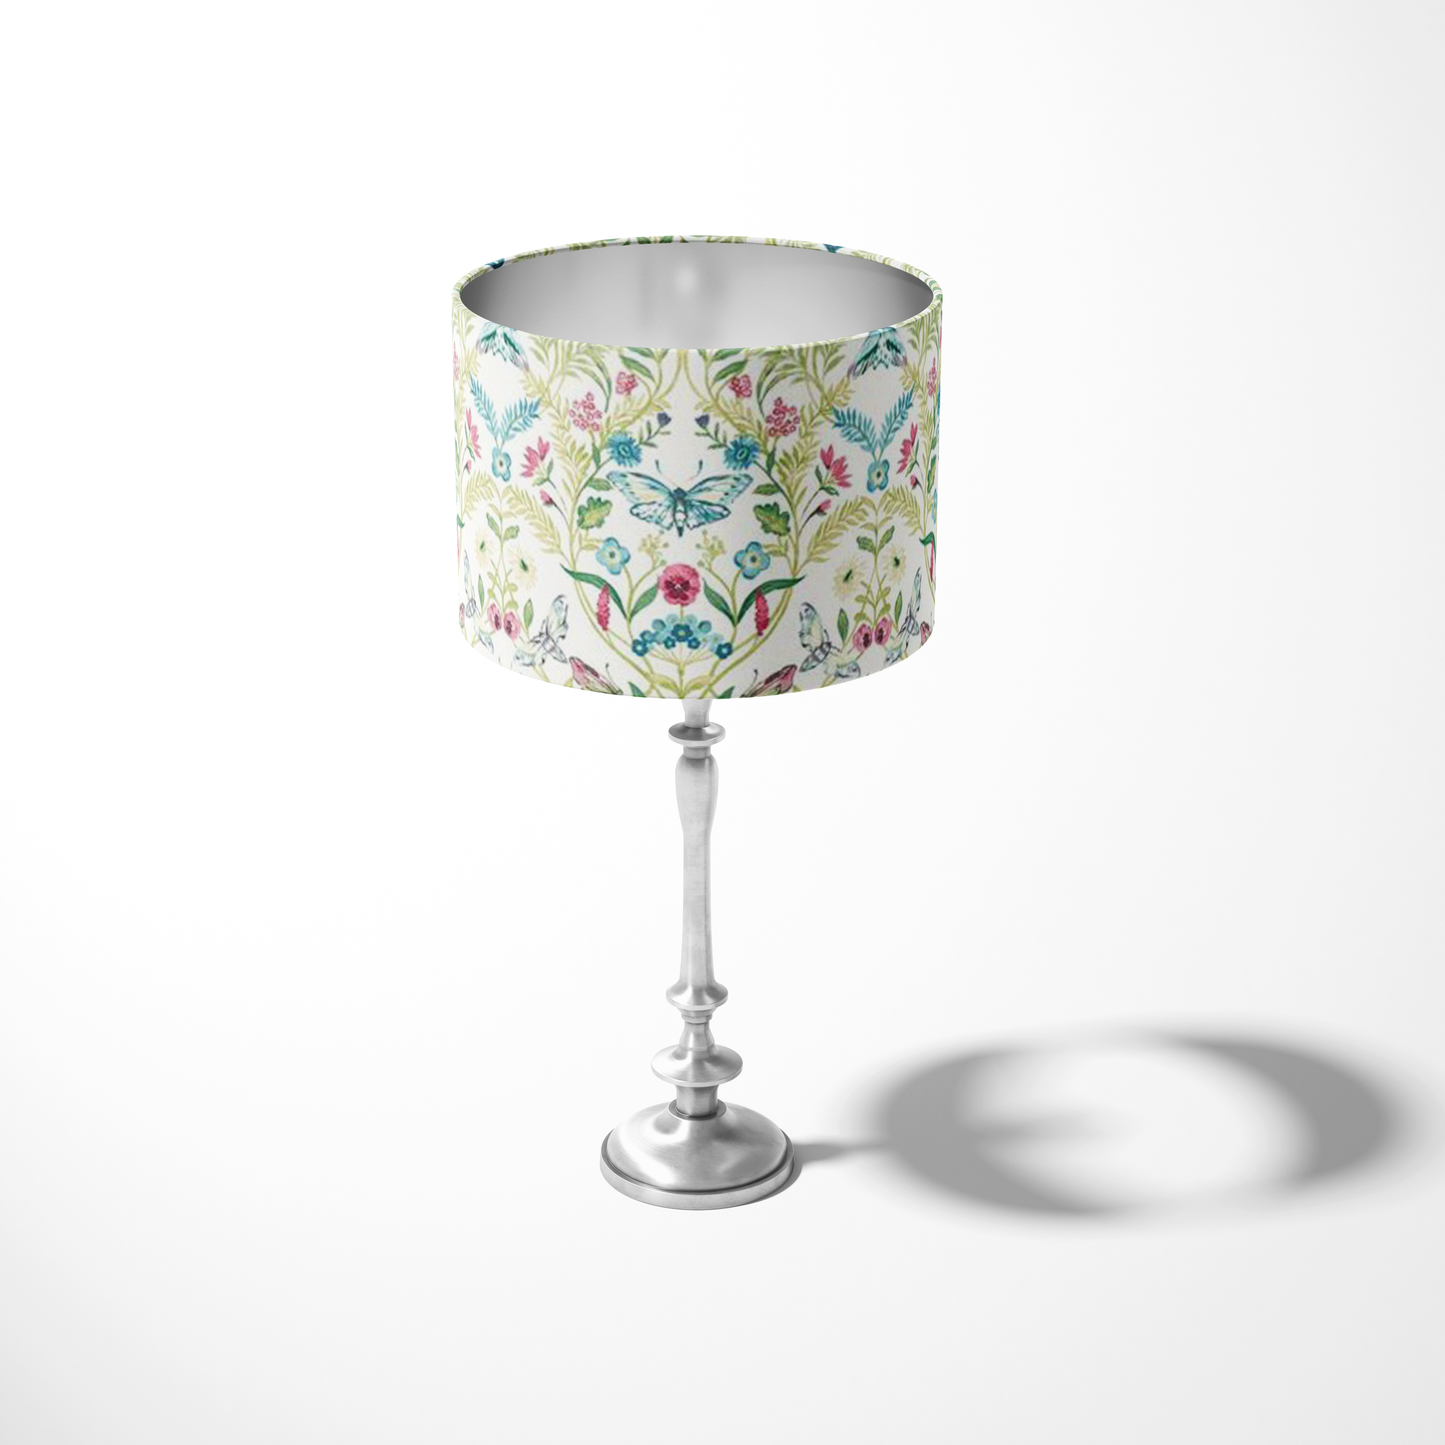 Pieris Lamp Shade by F&B featuring butterflies and moths in a nature inspired print